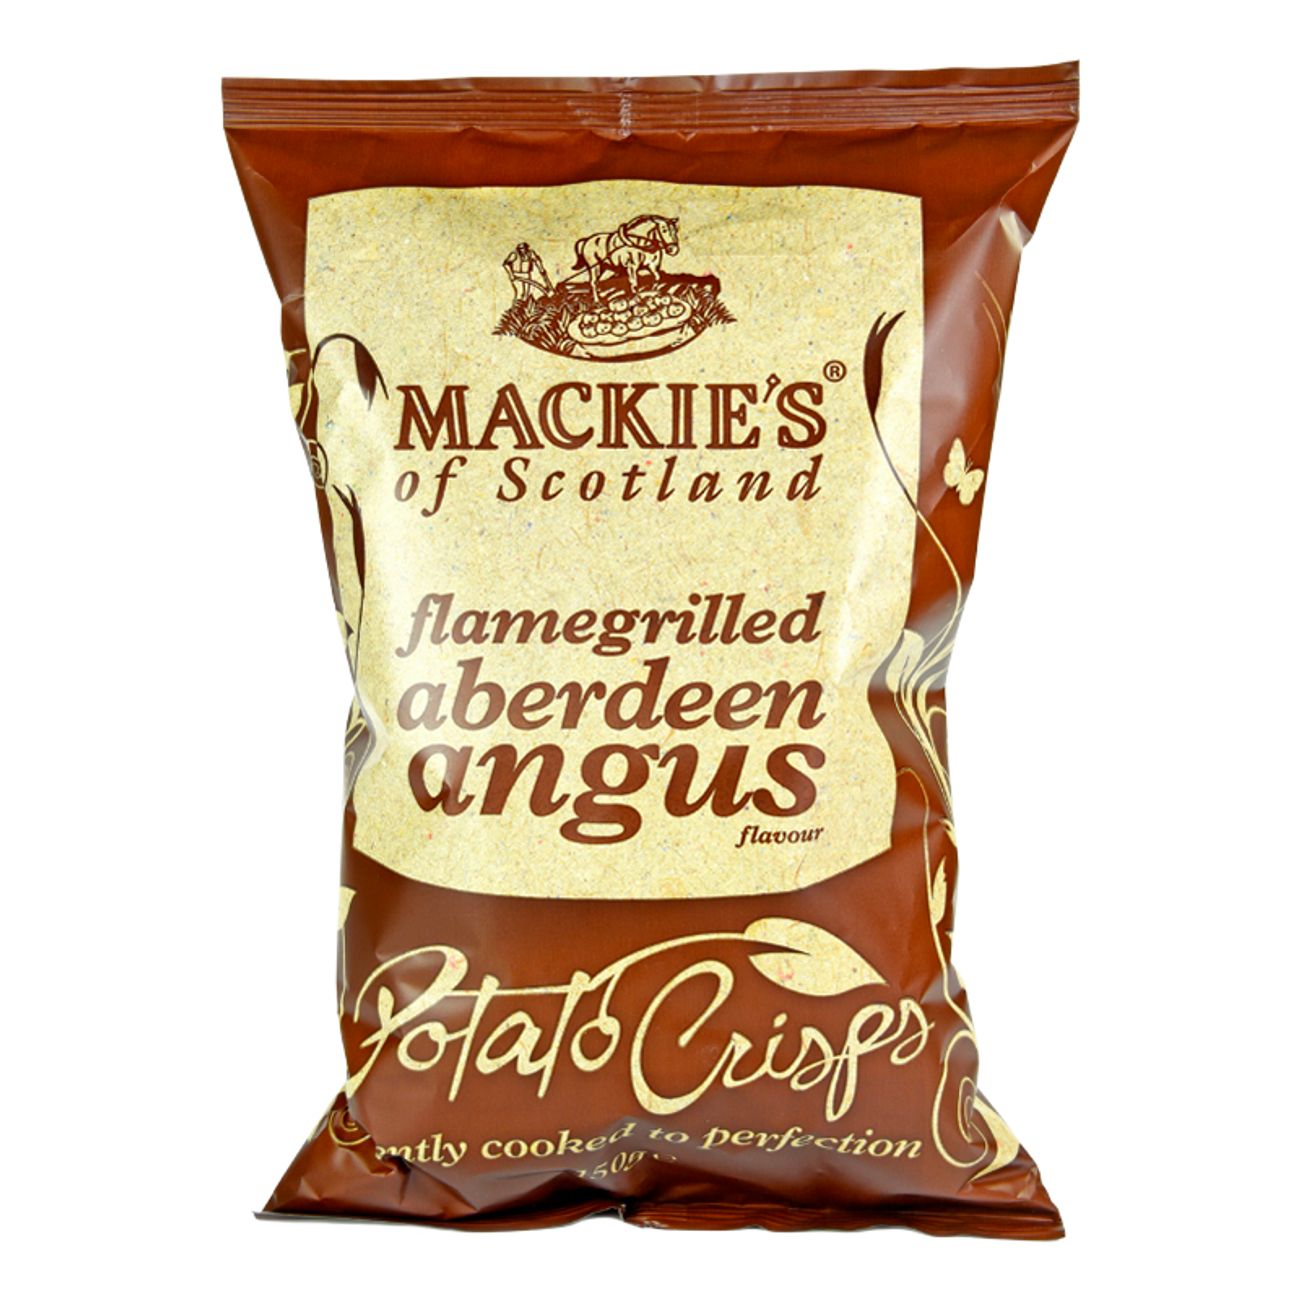 mackies-flamegrilled-aberdeen-angus-chips-84111-1